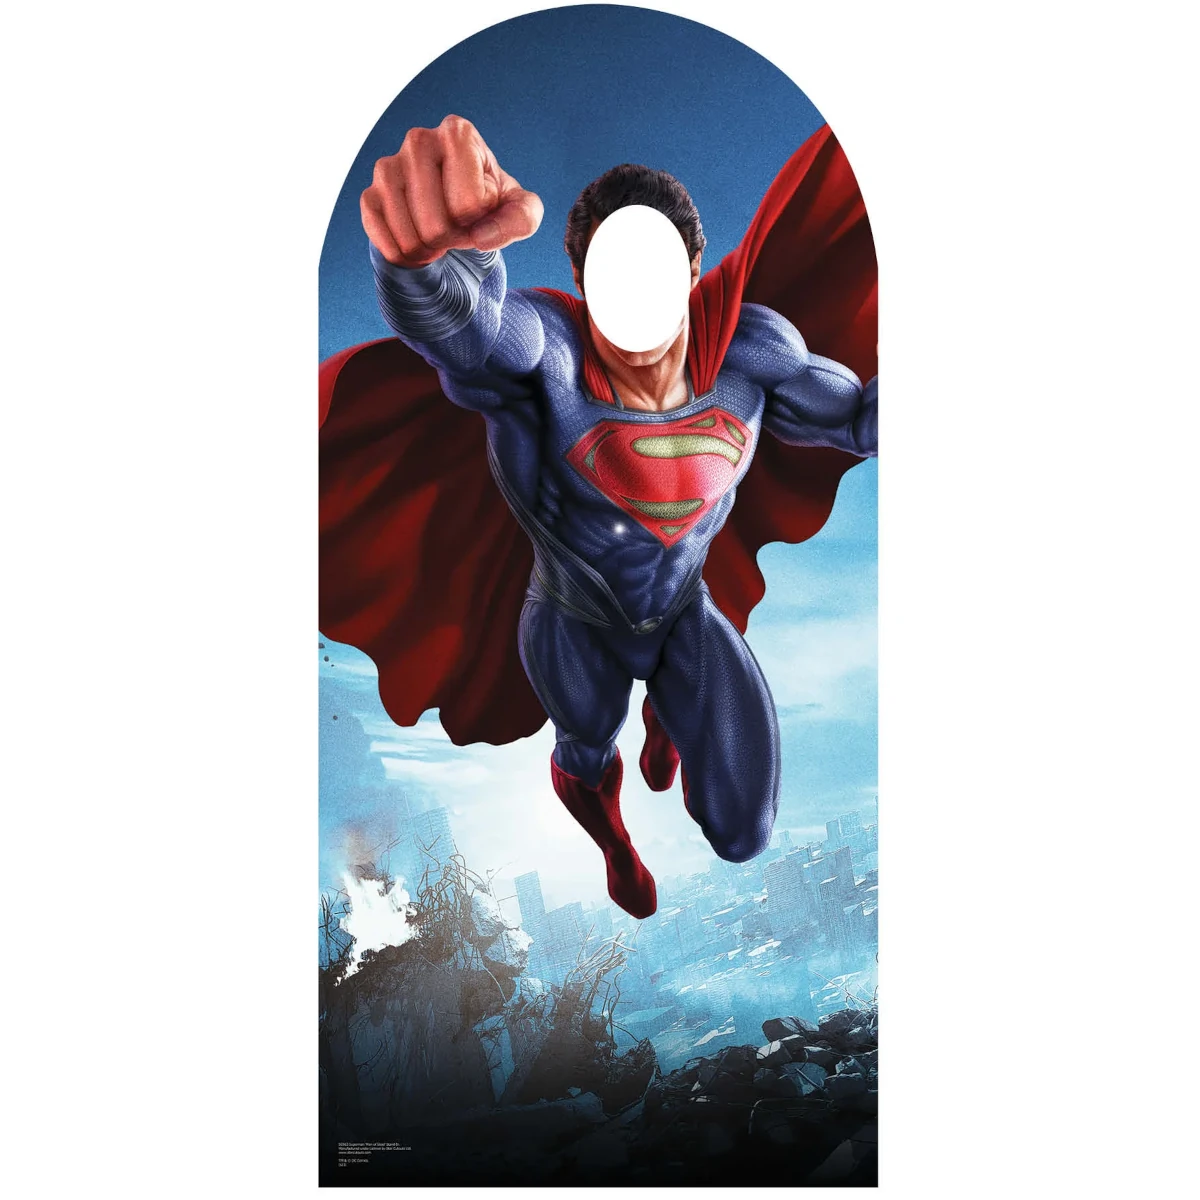 SC663 Superman 'Man of Steel' Official Lifesize Stand-In Cardboard Cutout Standee Front